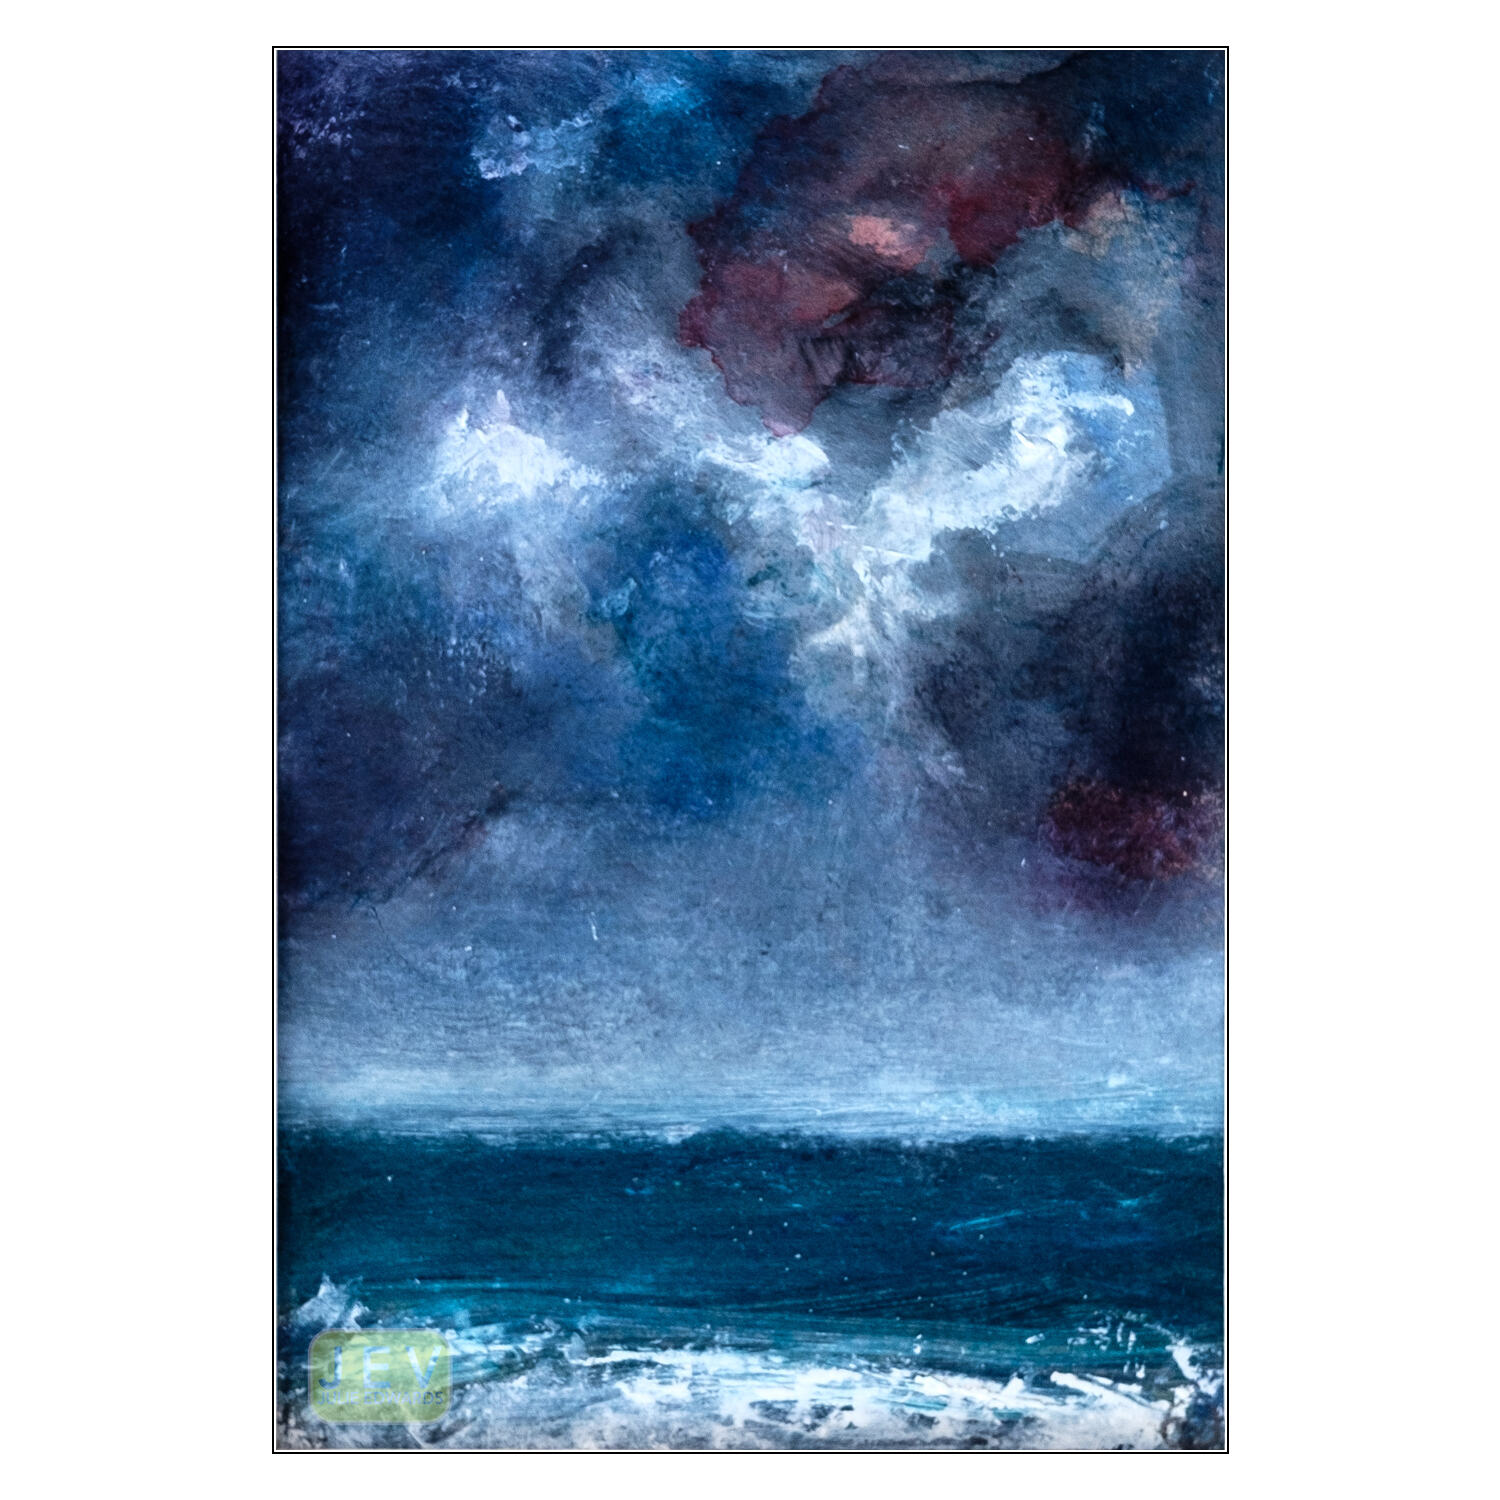 Copy of Storm Study 2 - Mixed Media on Paper